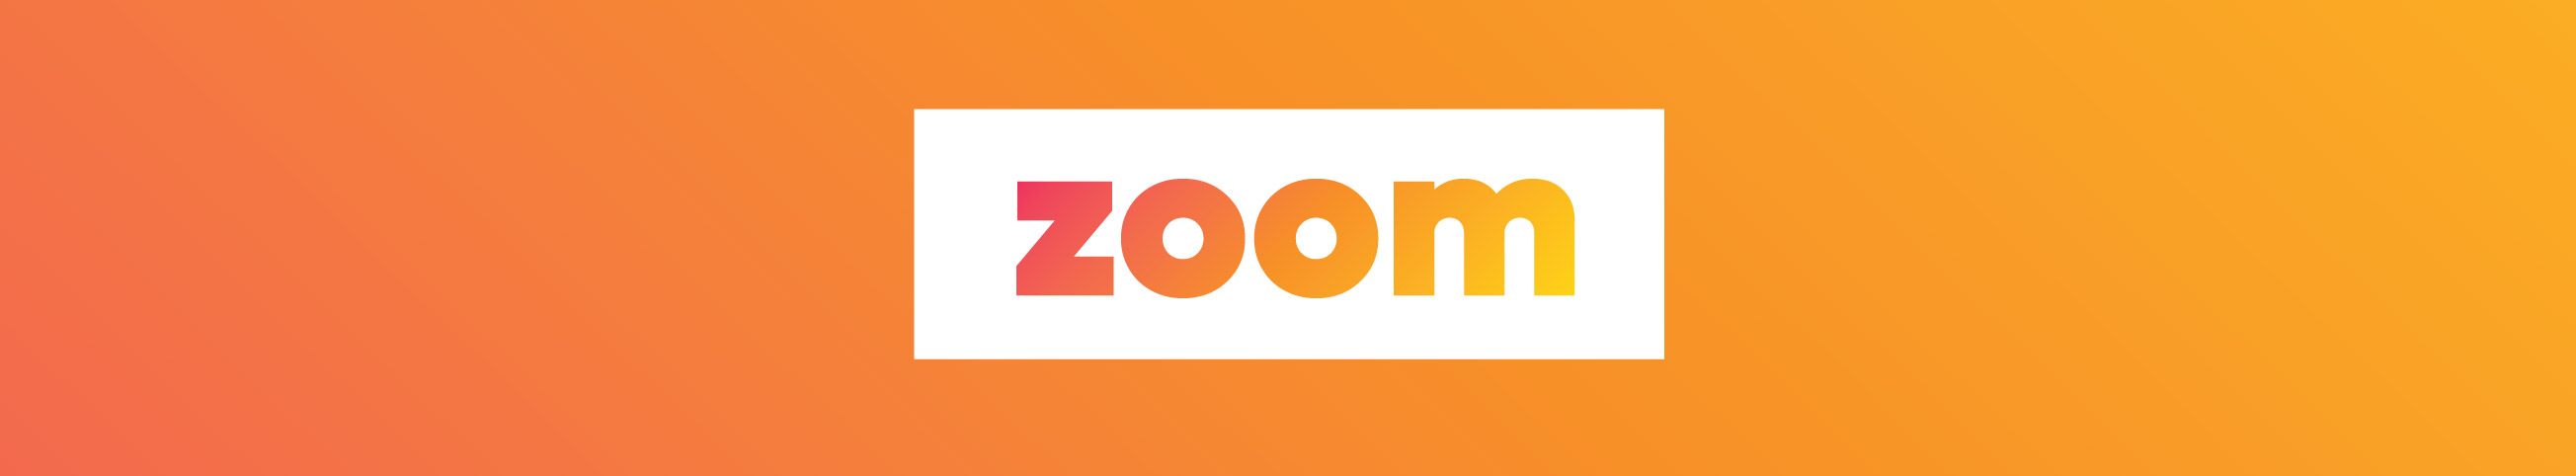 Click here to apply for a zoom under 16 travel pass